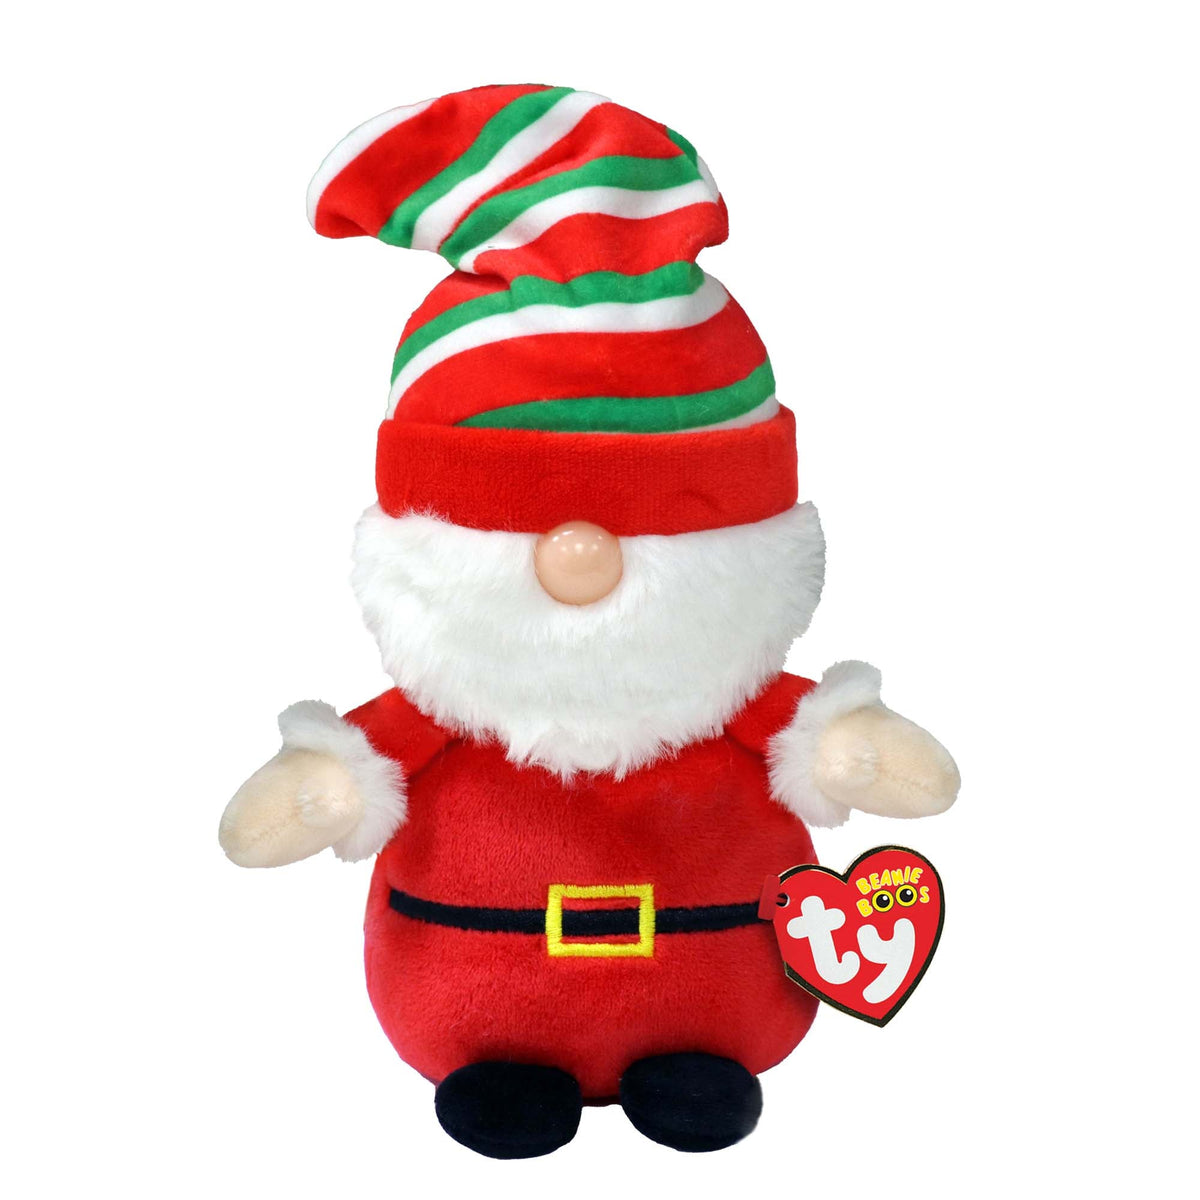 TY INC Christmas TY Beanie Boos Plush, Gnewman, 6 Inches, 1 Count